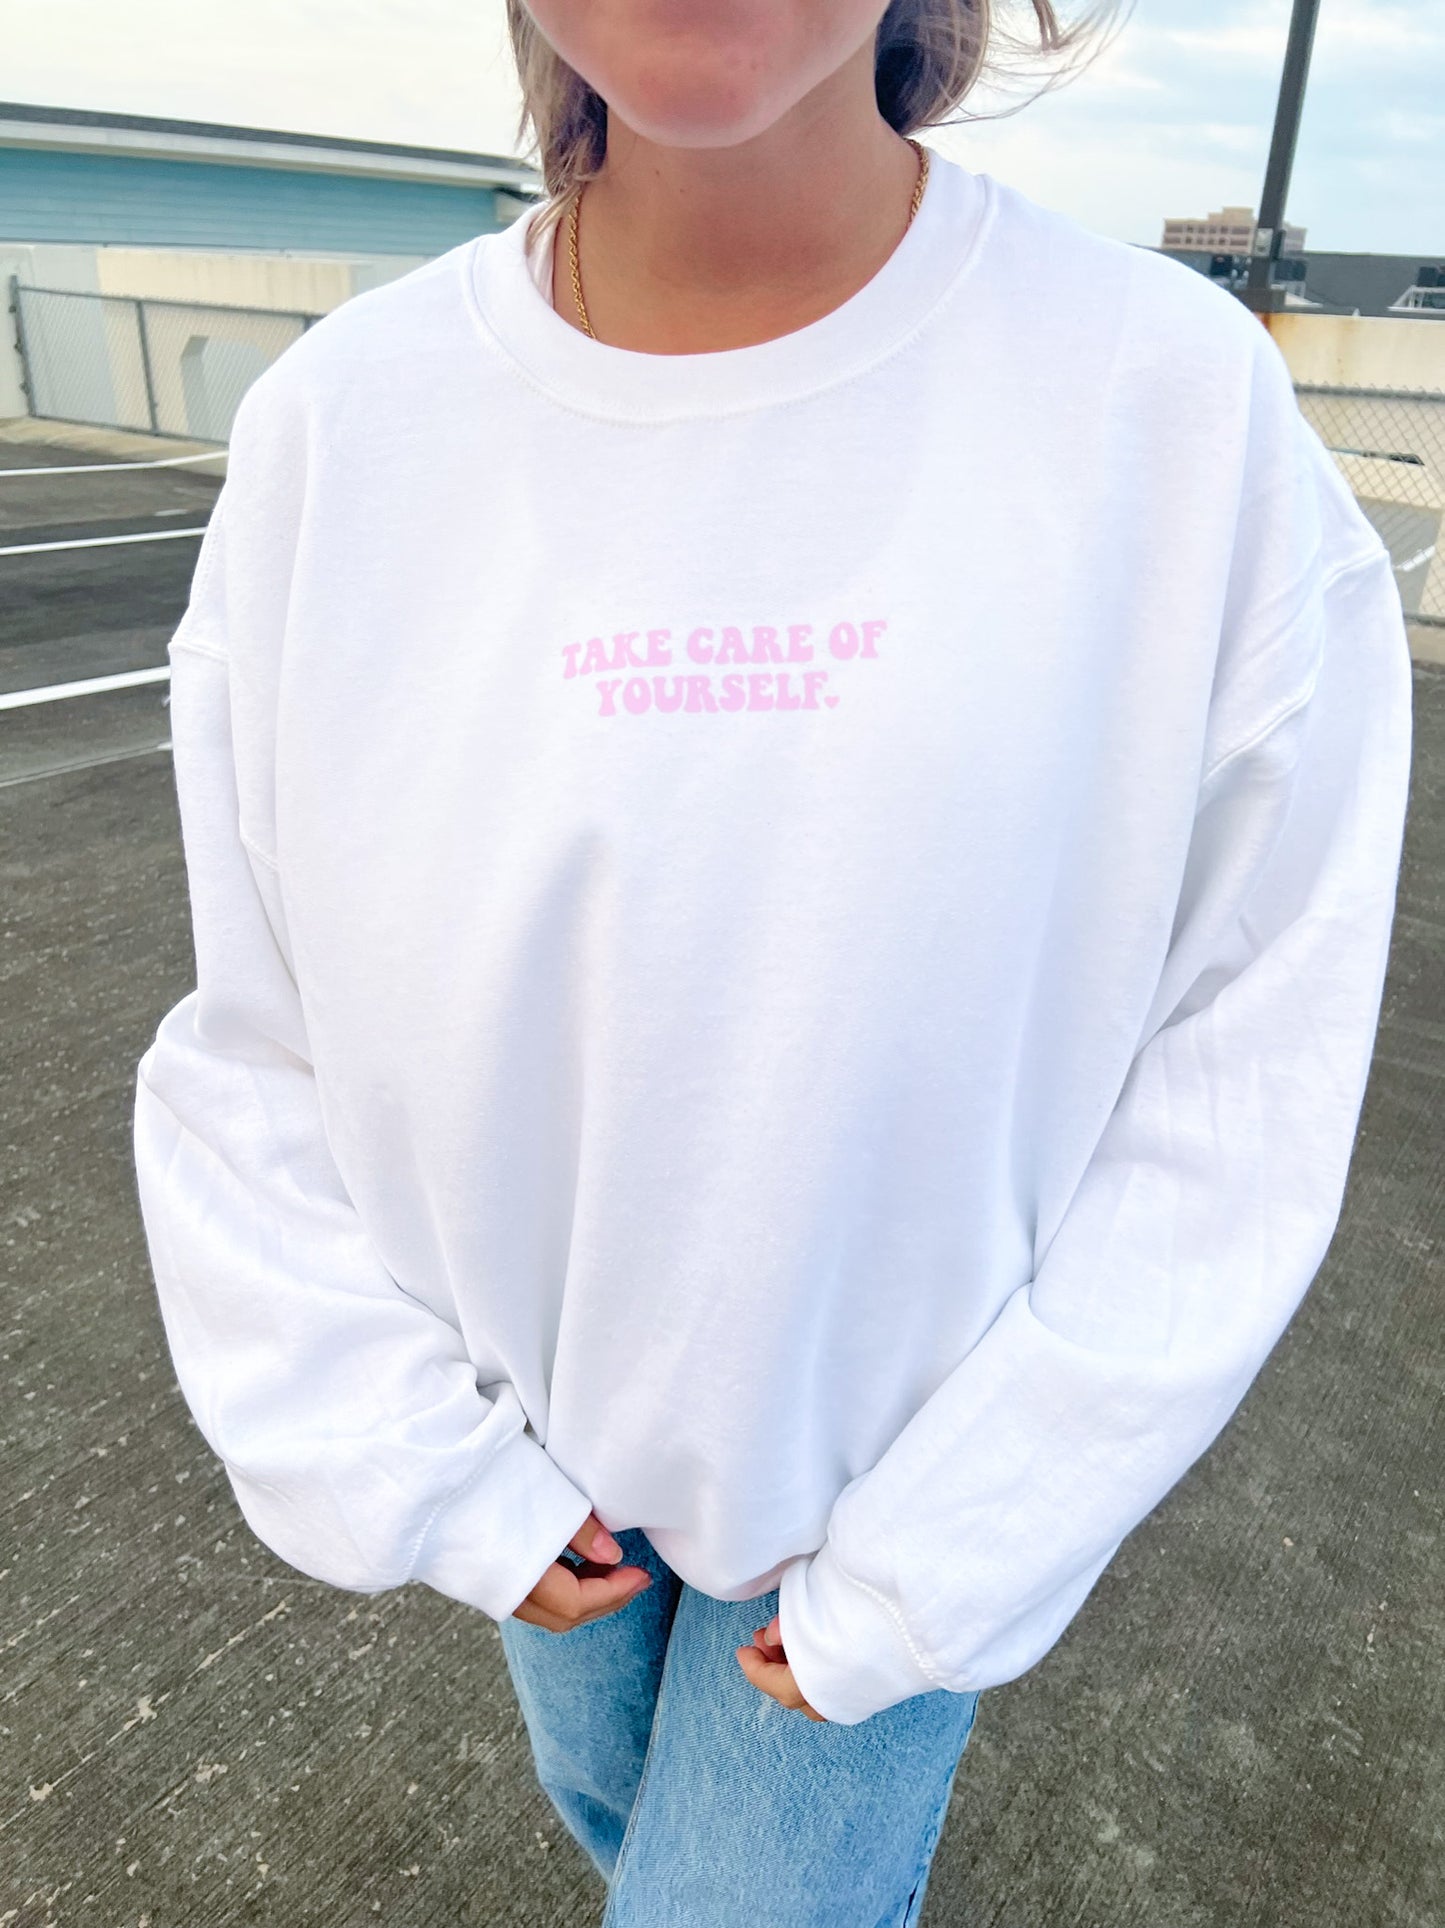 TAKE CARE OF YOURSELF CREWNECK - Jewels Kennedy Designs